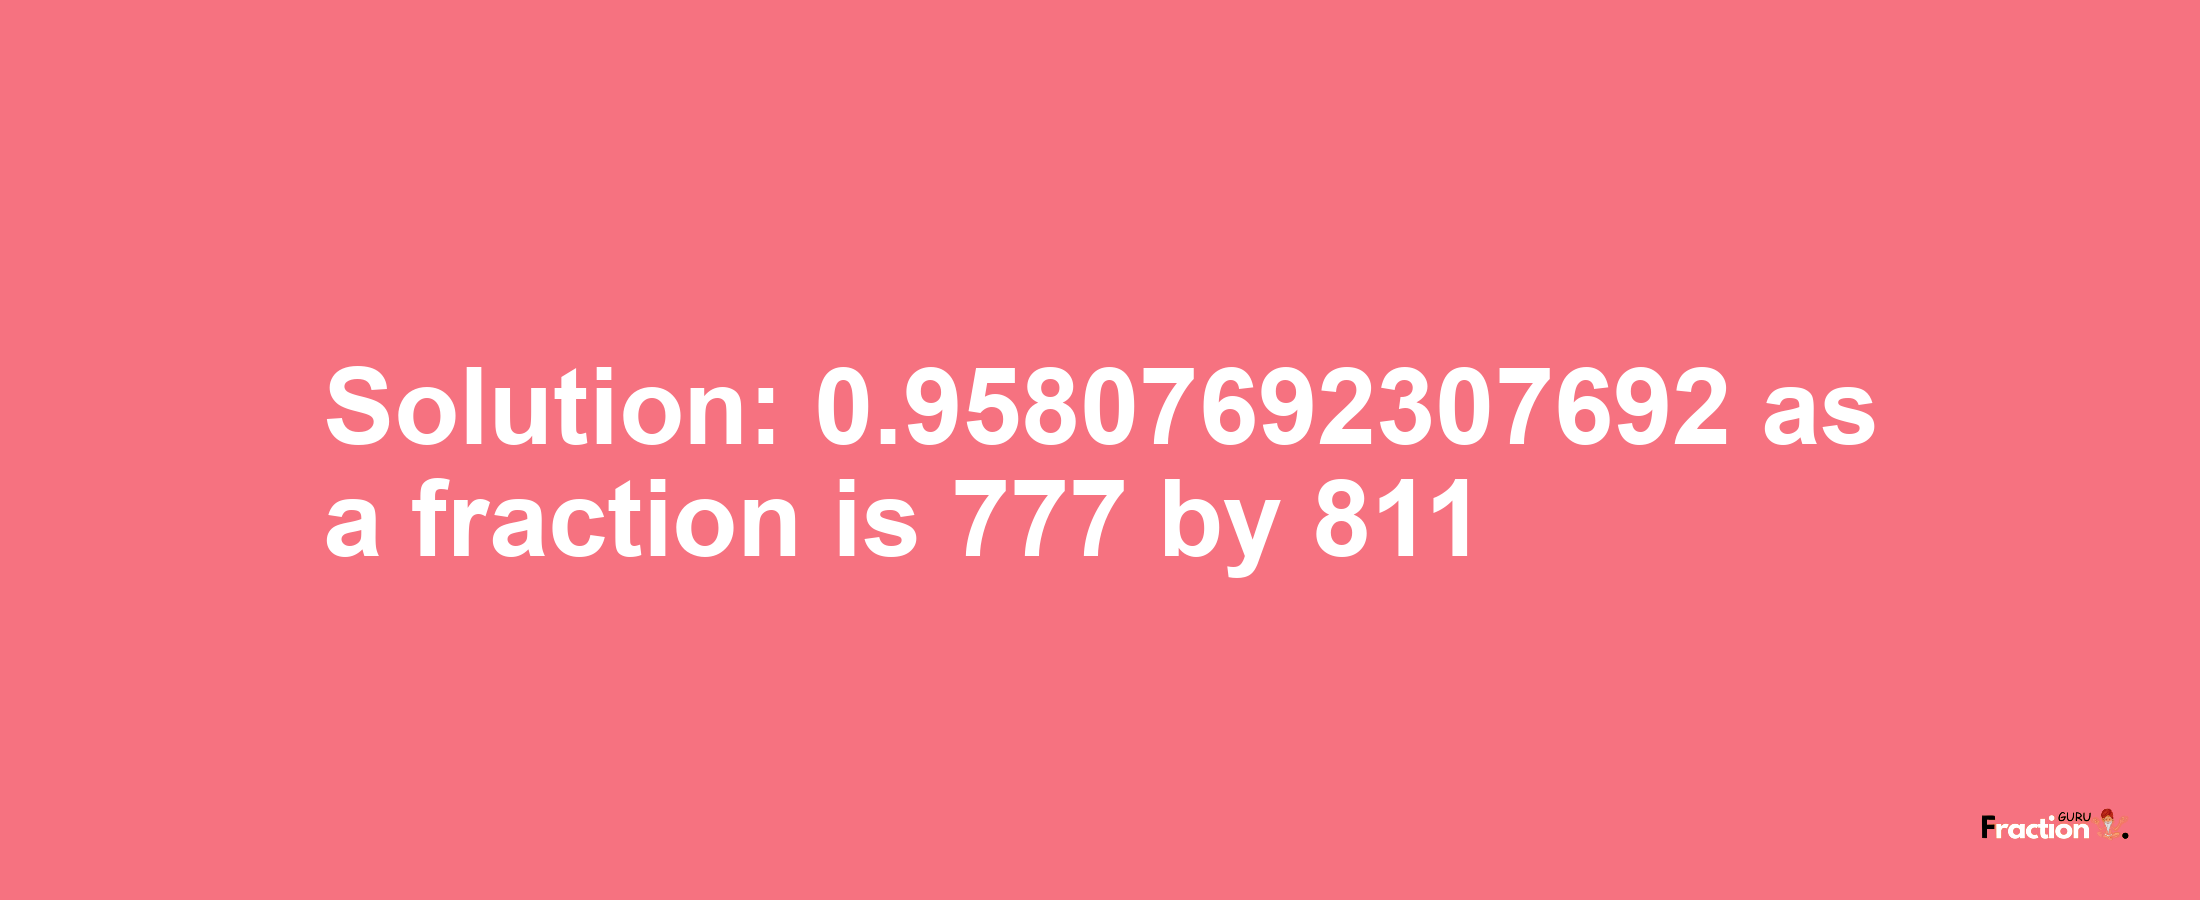 Solution:0.95807692307692 as a fraction is 777/811